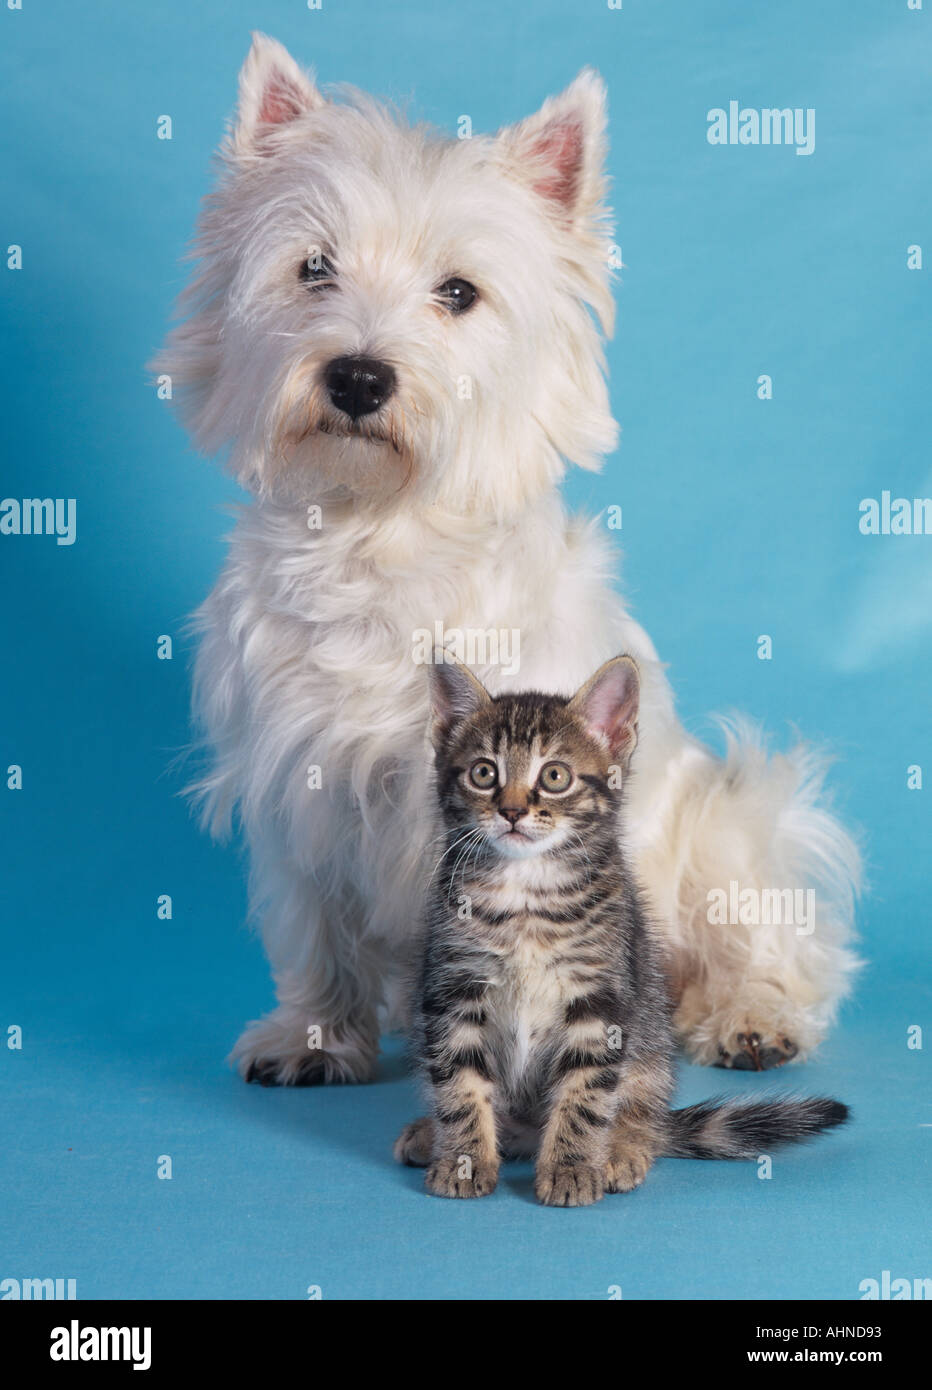 West Highland Terrier and Tabby Kitten Stock Photo